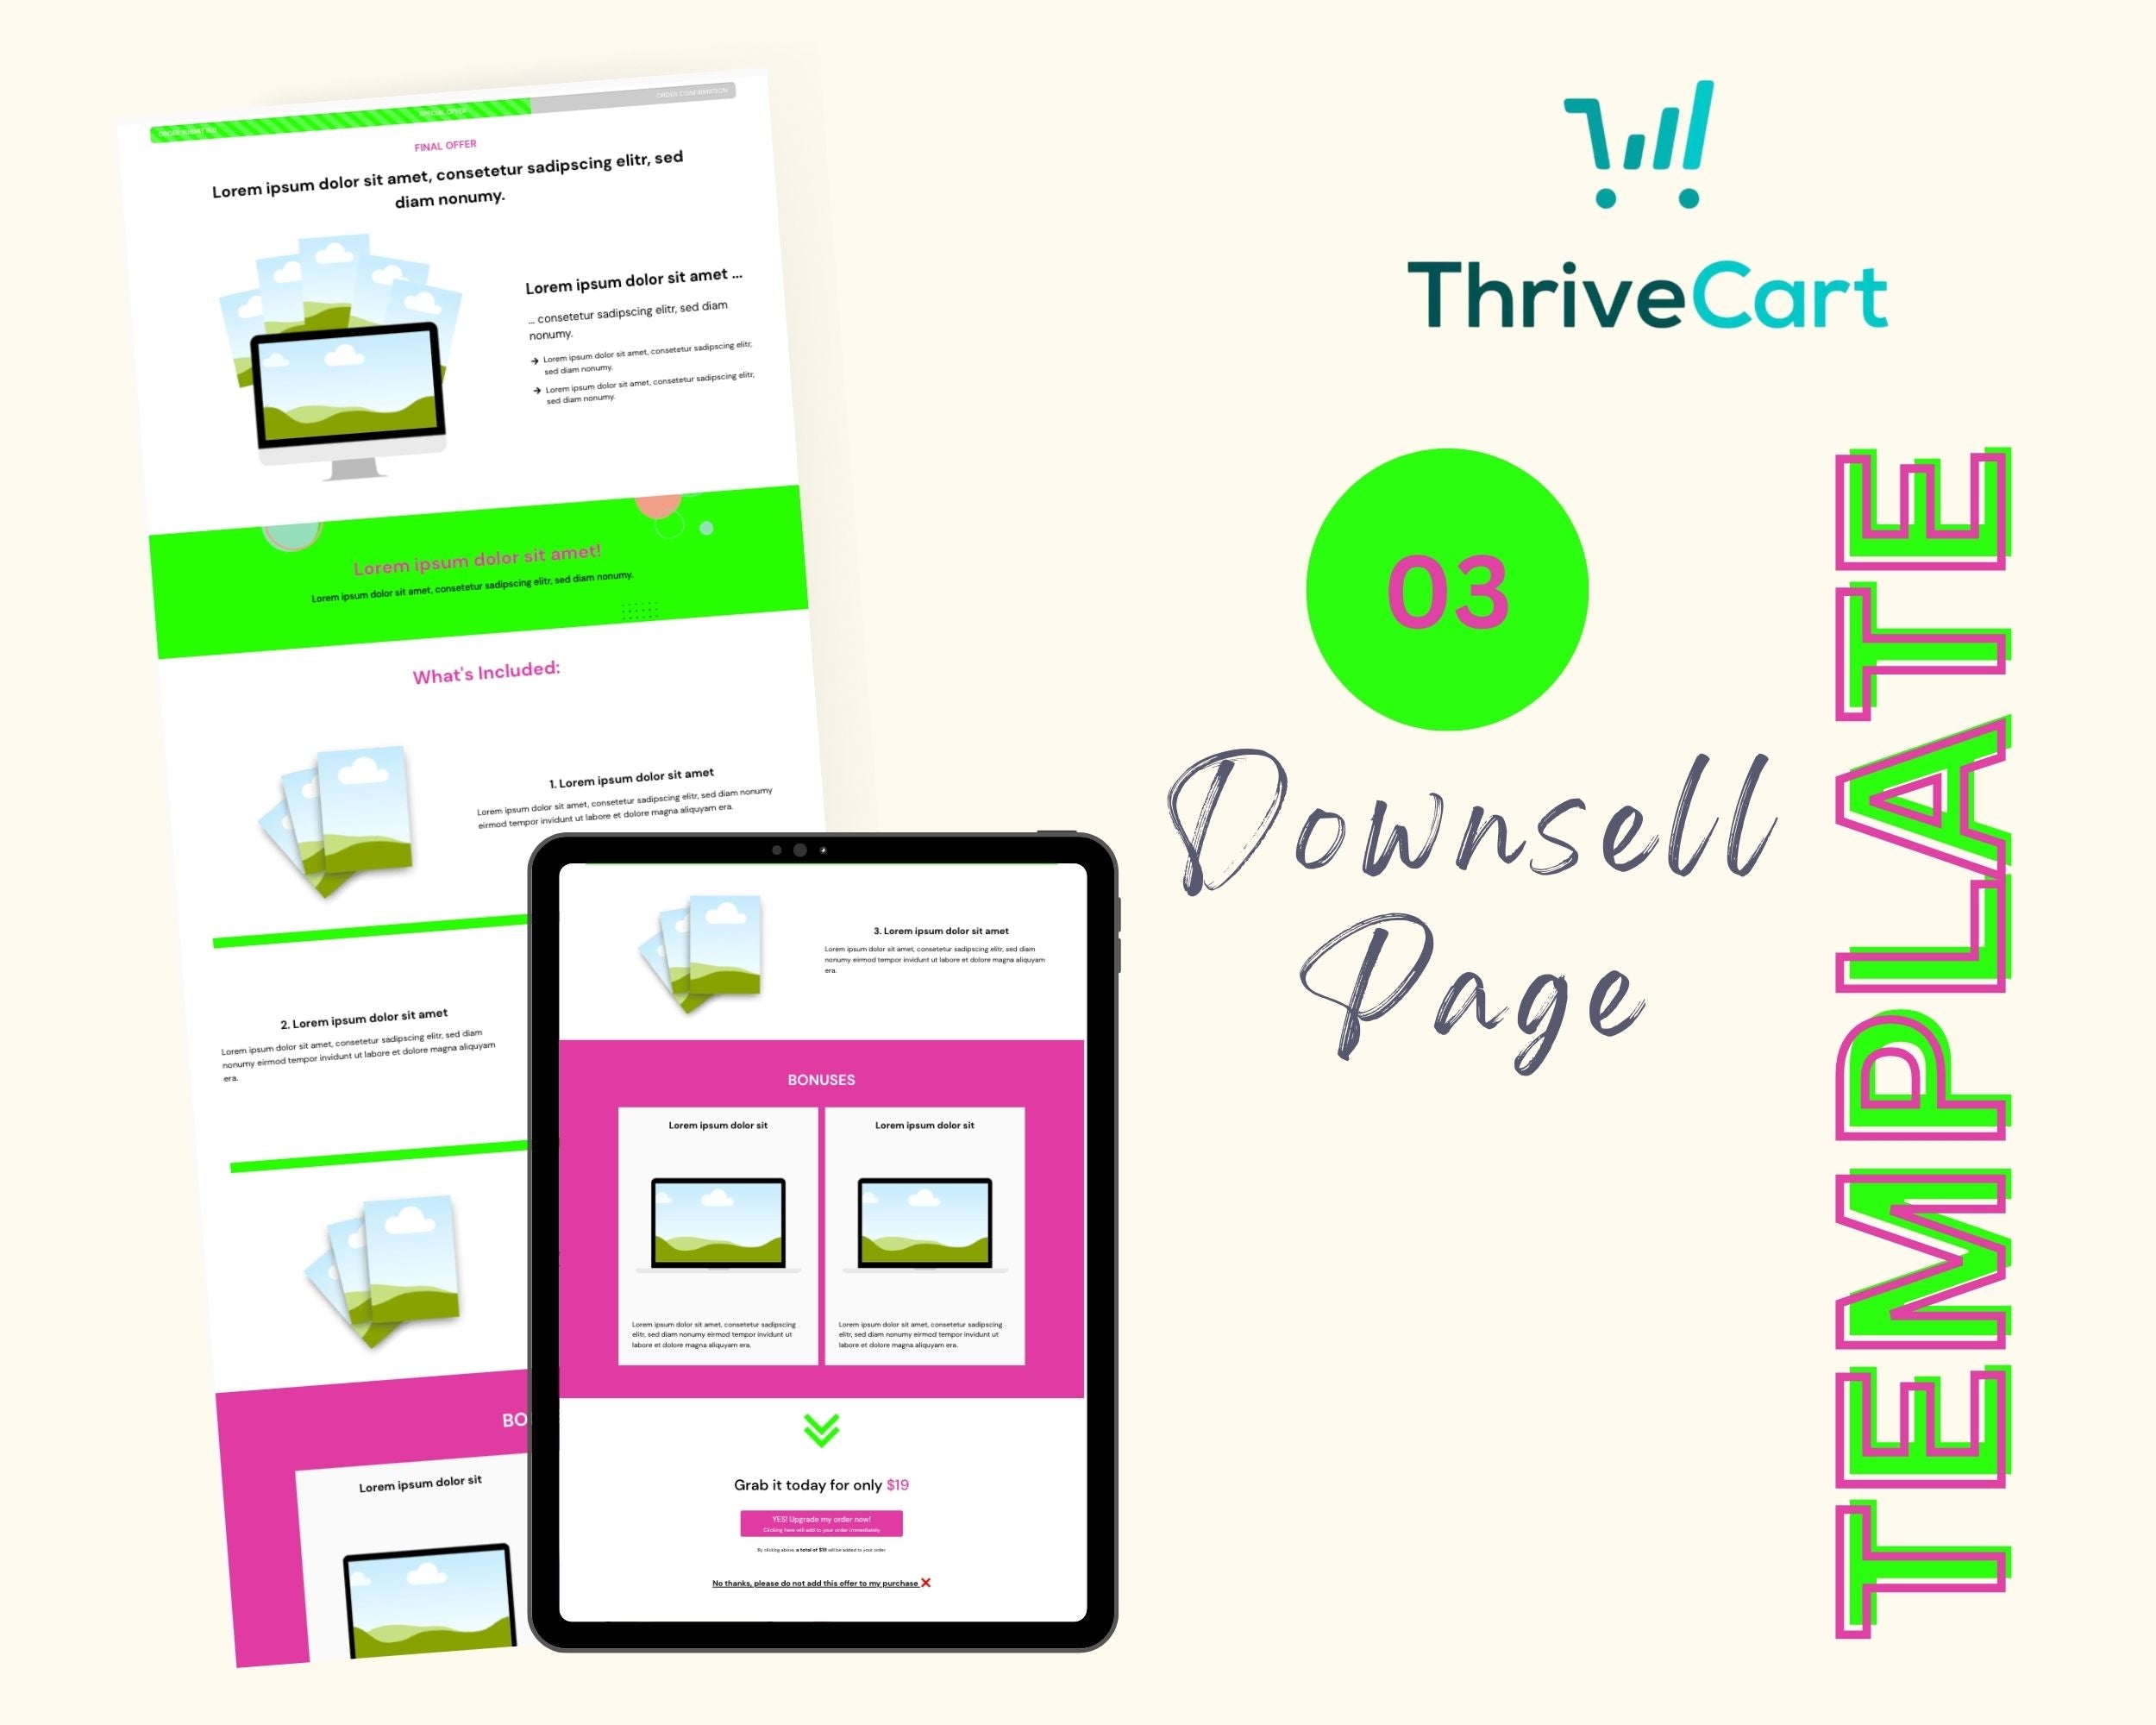 Neon ThriveCart 4-Page Sales Funnel Template